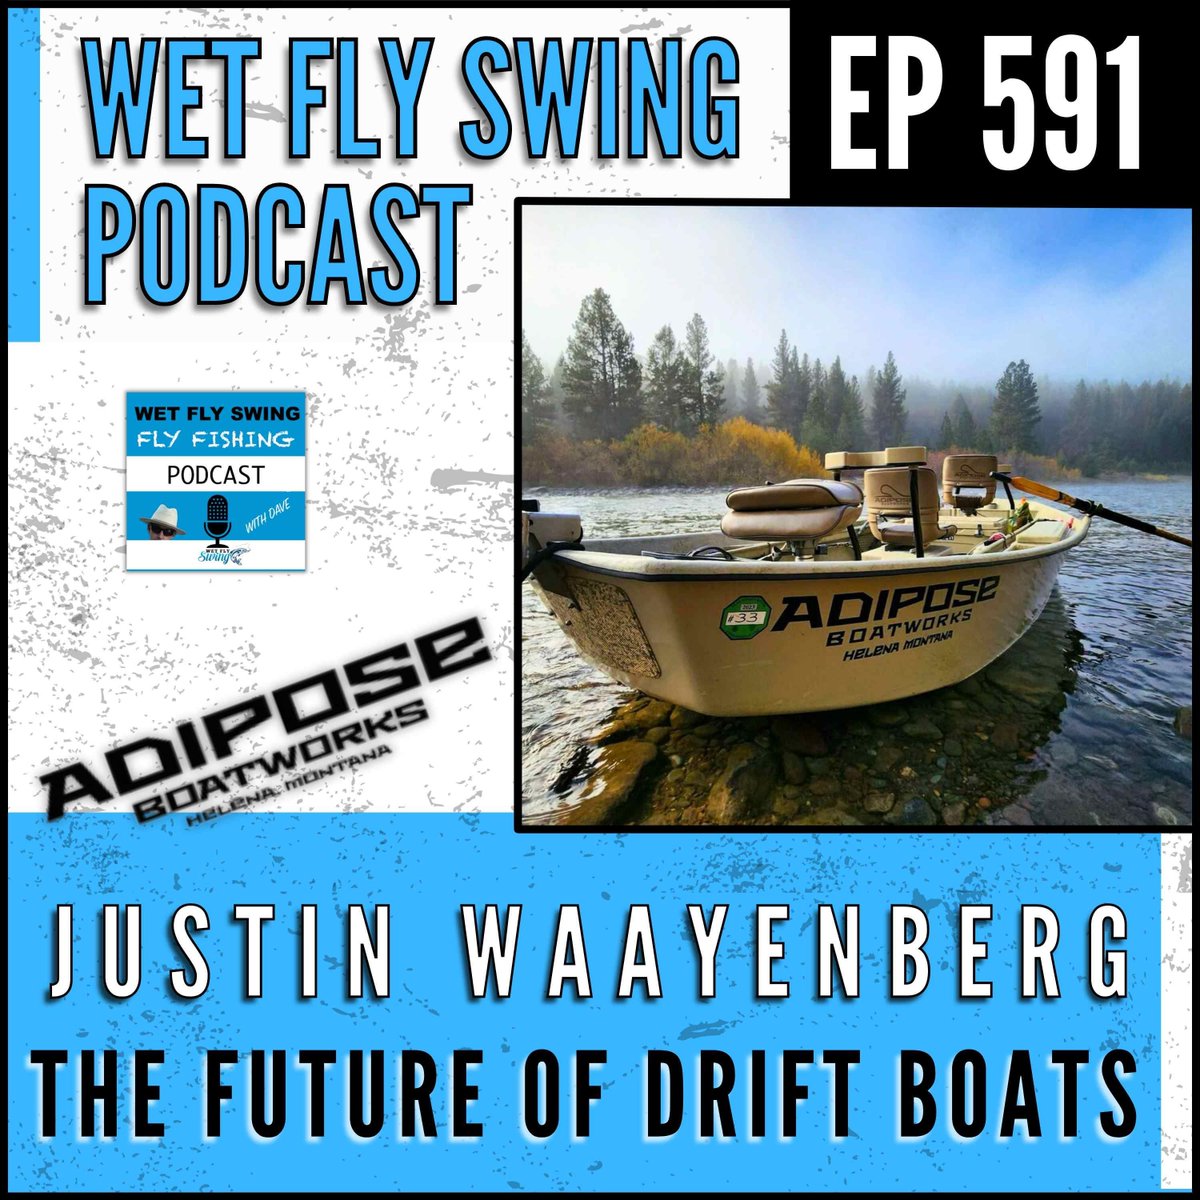 Justin Waayenberg of Adipose Boatworks brings us groundbreaking drift boat innovations. From resin infusion technology to essential safety practices, this episode is a must-listen. Listen here >> buff.ly/4aOHwKN